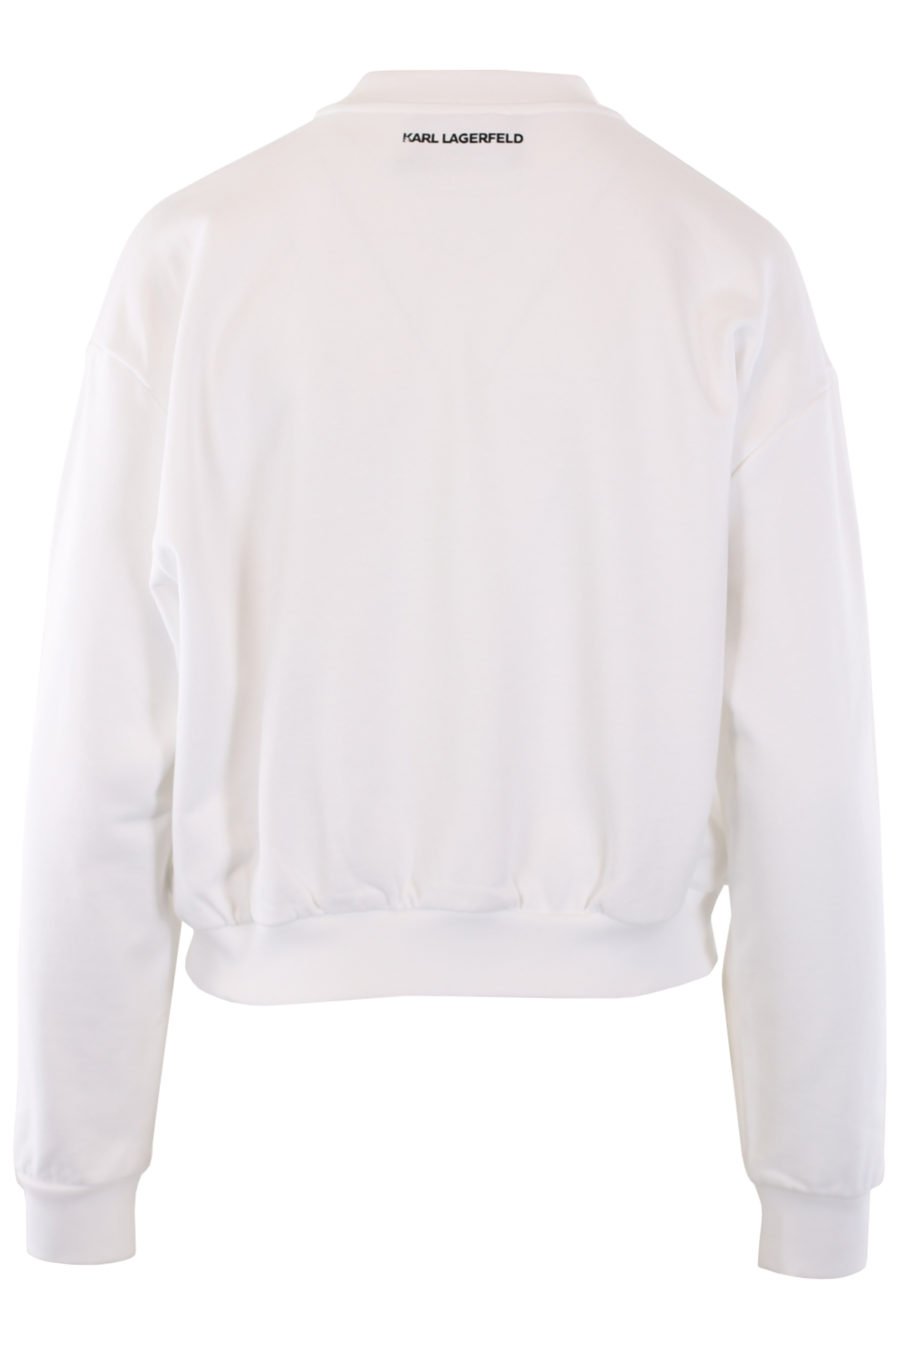 White sweatshirt with embroidered blue logo - IMG 0834